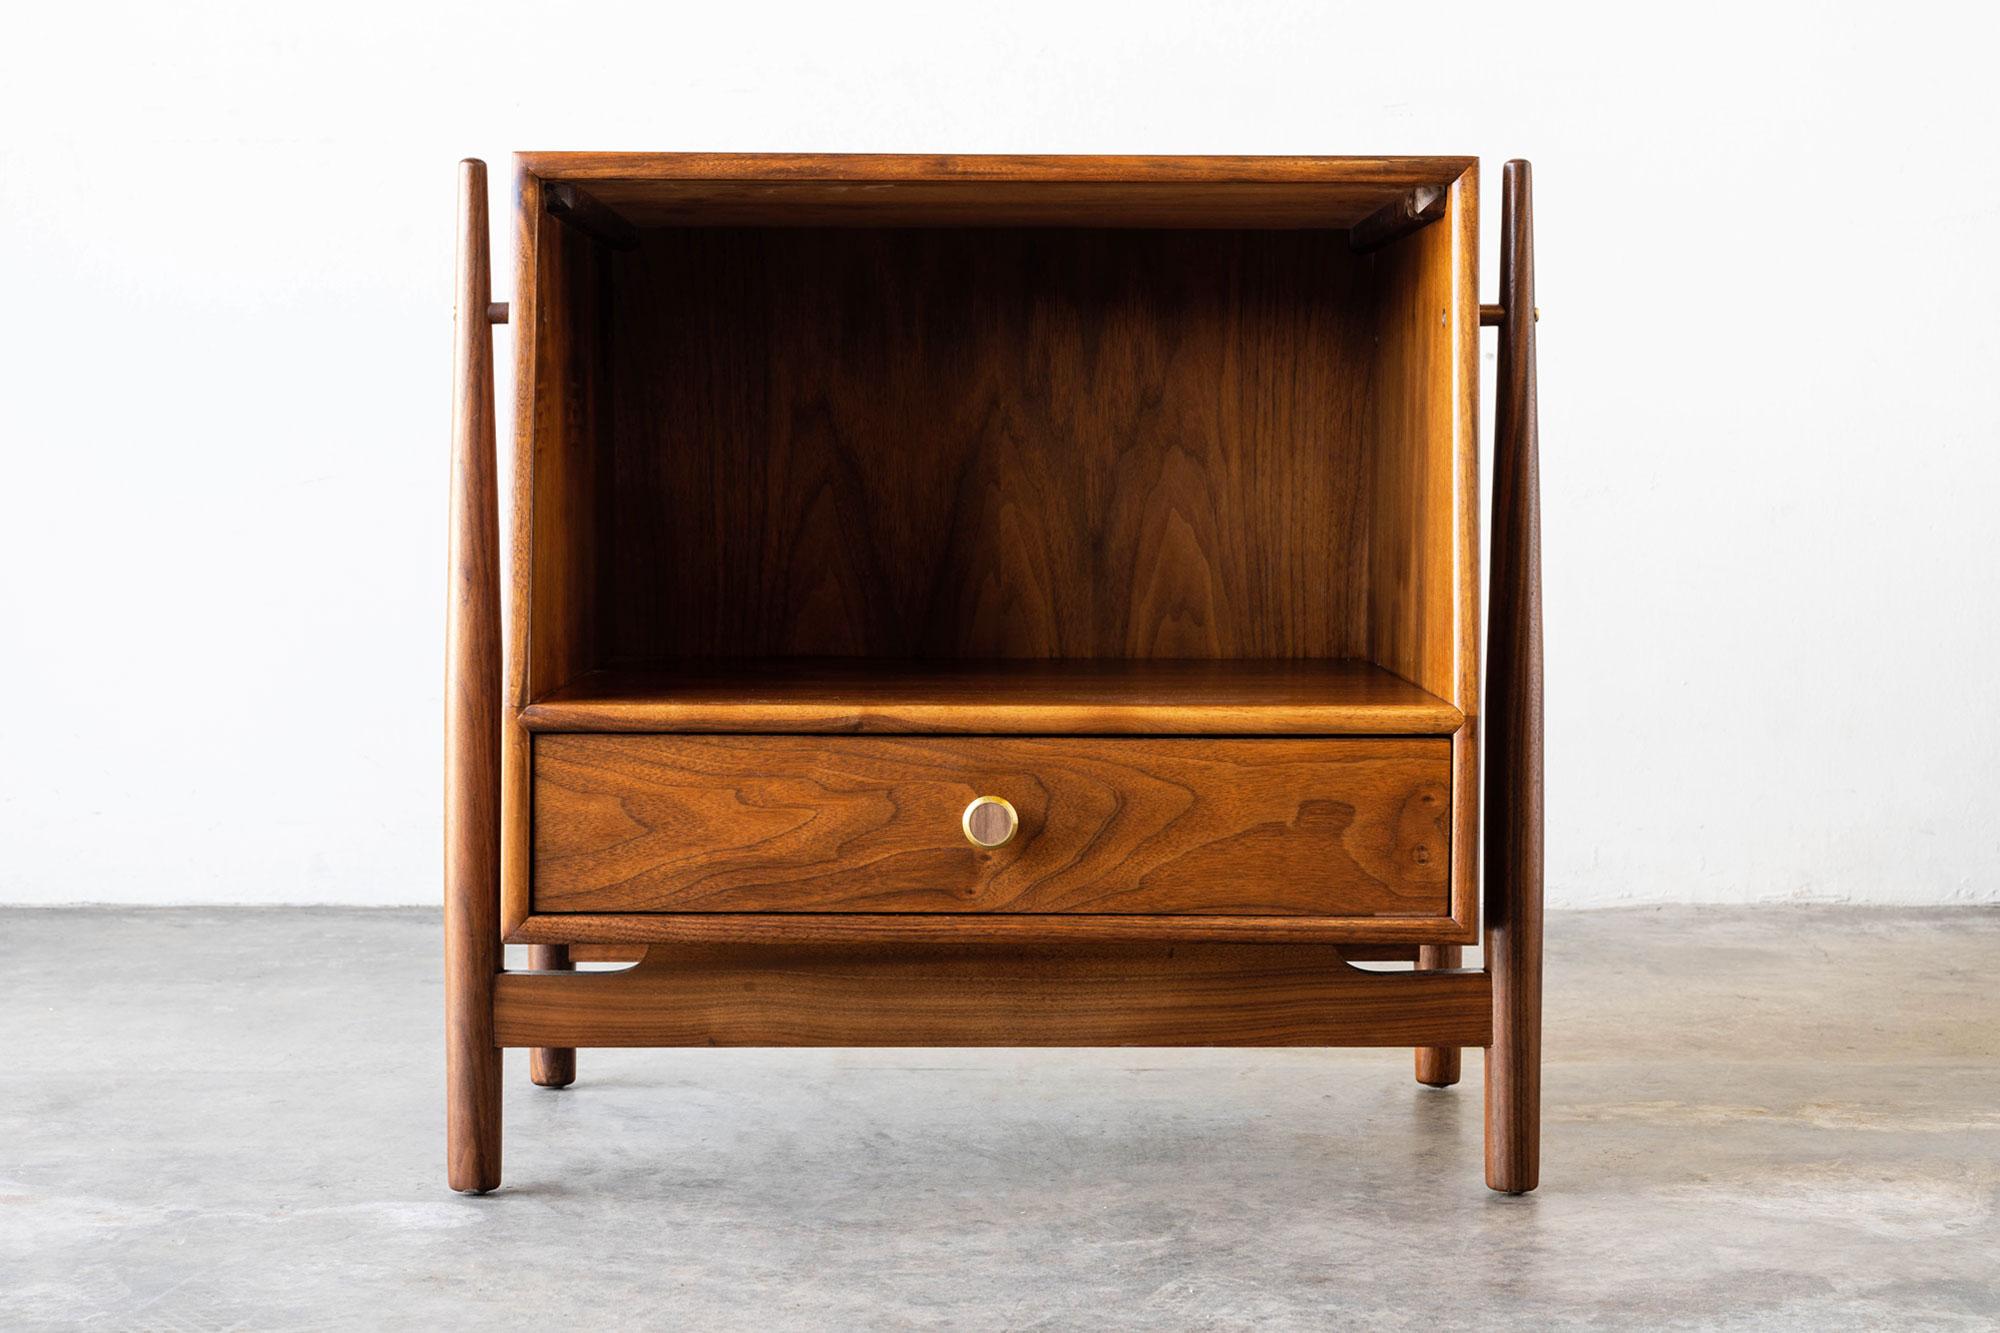 This Mid-Century Modern nightstand was designed by Kipp Stewart & Stewart MacDougall for Drexel's 'Declaration' line in the 1960s. The iconic 'Declaration' collection by Drexel features minimalist expressions and a straightforward design that is